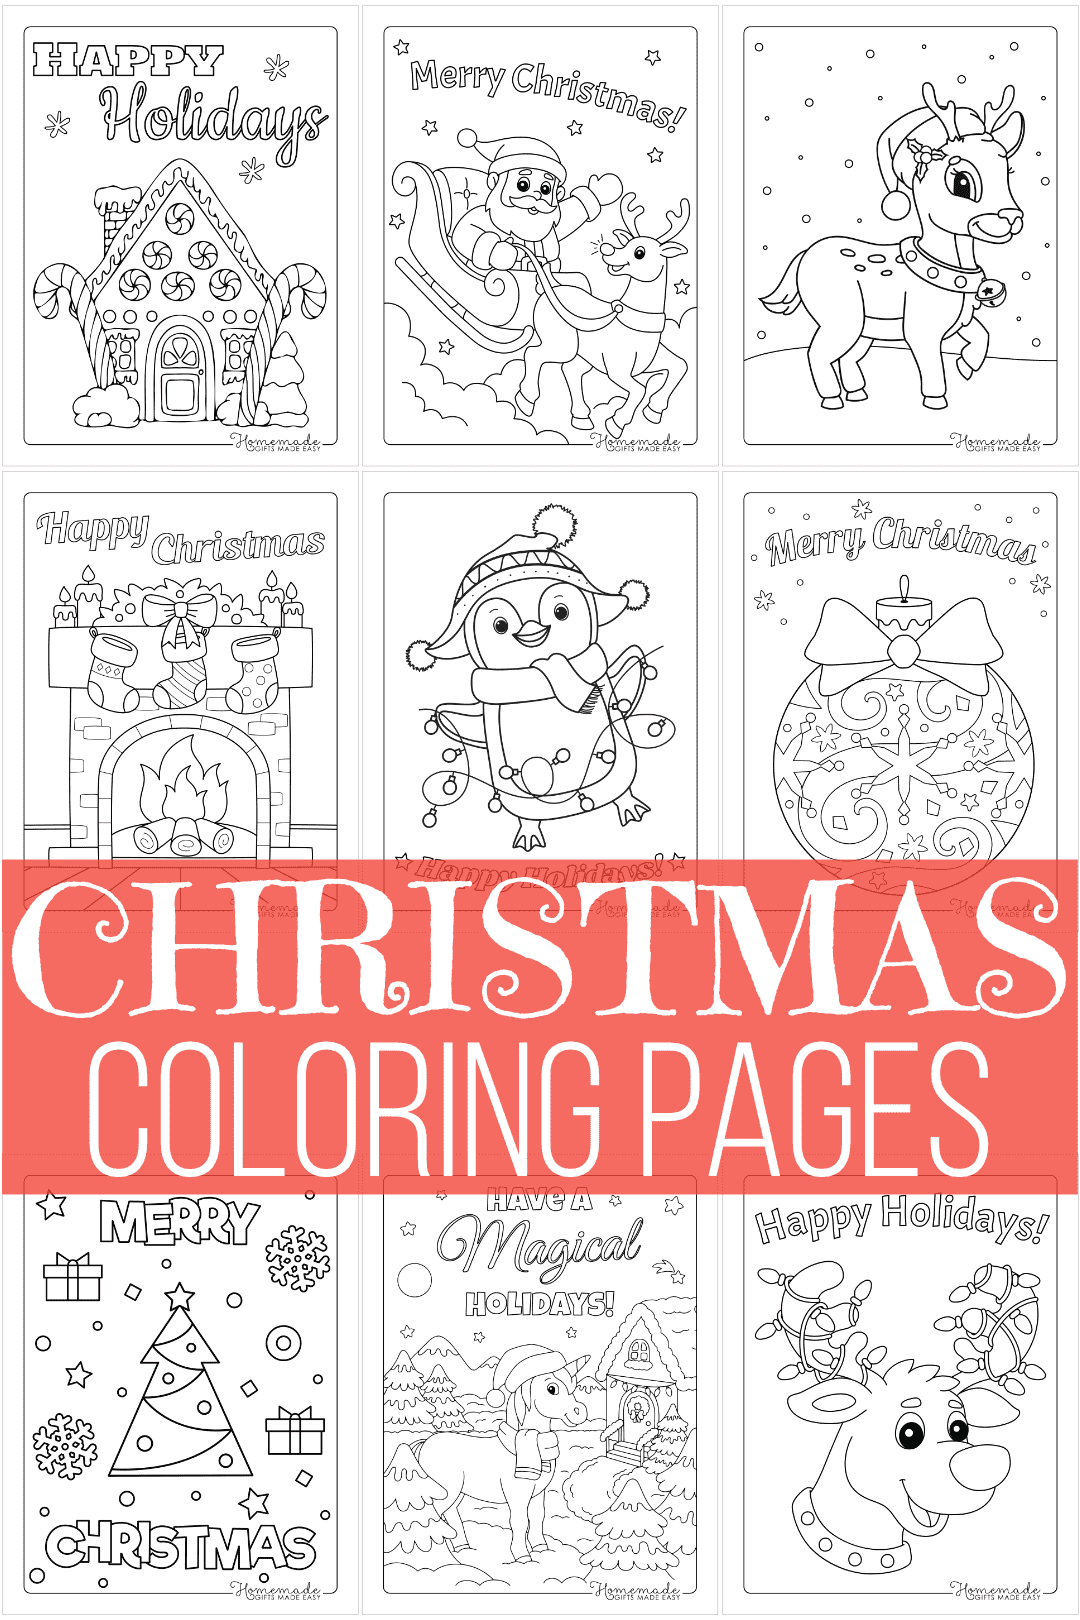 Turkey coloring pages - Free 38+ Coloring Pages Designs